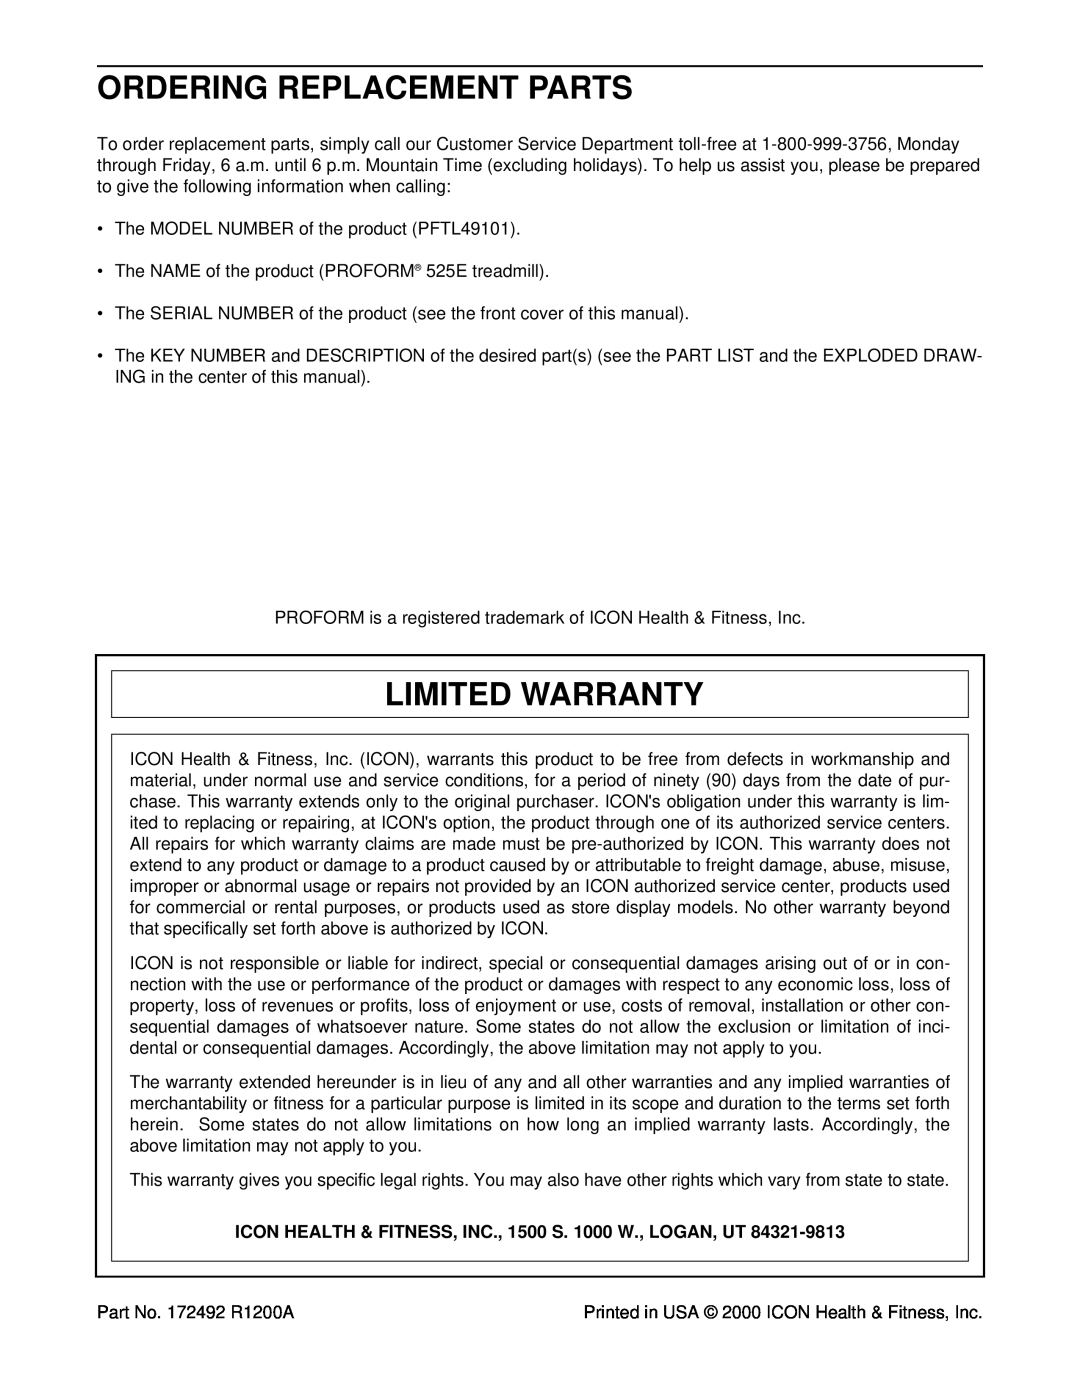 ProForm PFTL49101 Ordering Replacement Parts, Limited Warranty, ICON HEALTH & FITNESS, INC., 1500 S. 1000 W., LOGAN, UT 